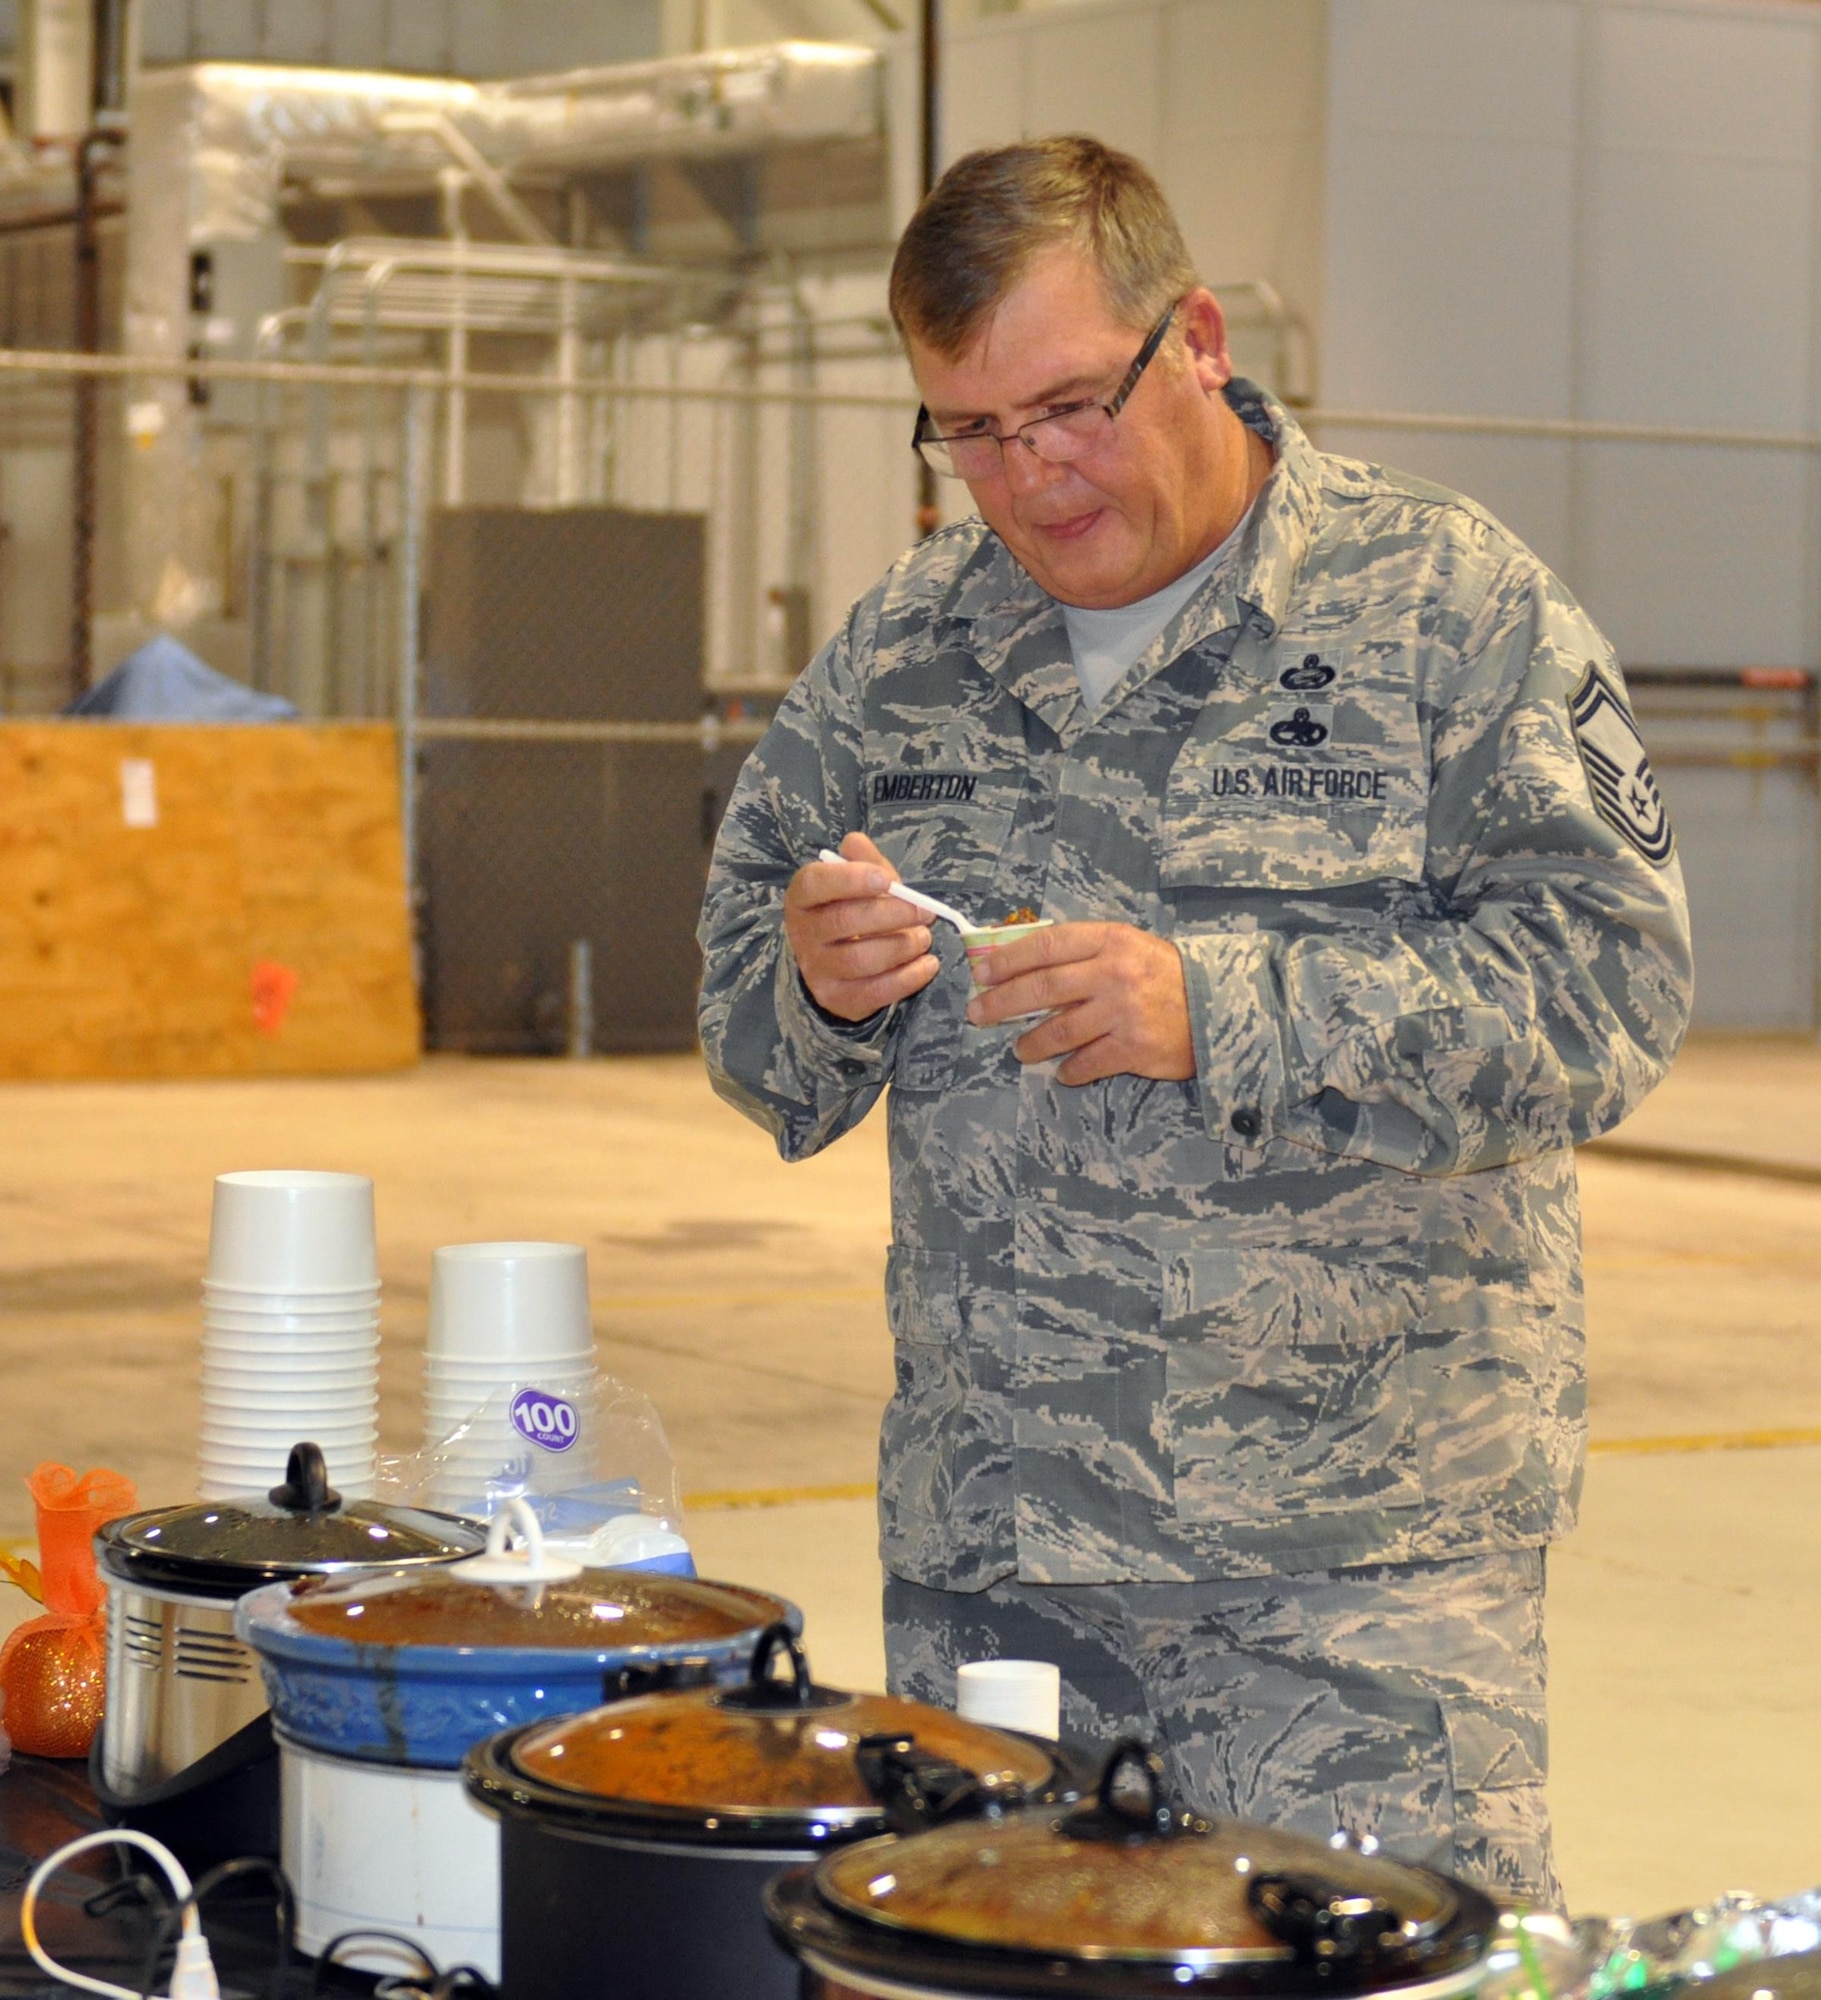 Senior Master Sgt. Timothy Emberton, 445th Force Support Squadron chief of education and training, samples one of 17 pots of chili while serving as a judge during the 445th Airlift Wing’s 16th Annual Chili Cook-off Oct. 27, 2016. The event raised $400 for the Combined Federal Campaign. (U.S. Air Force photo/Stacy Vaughn)    